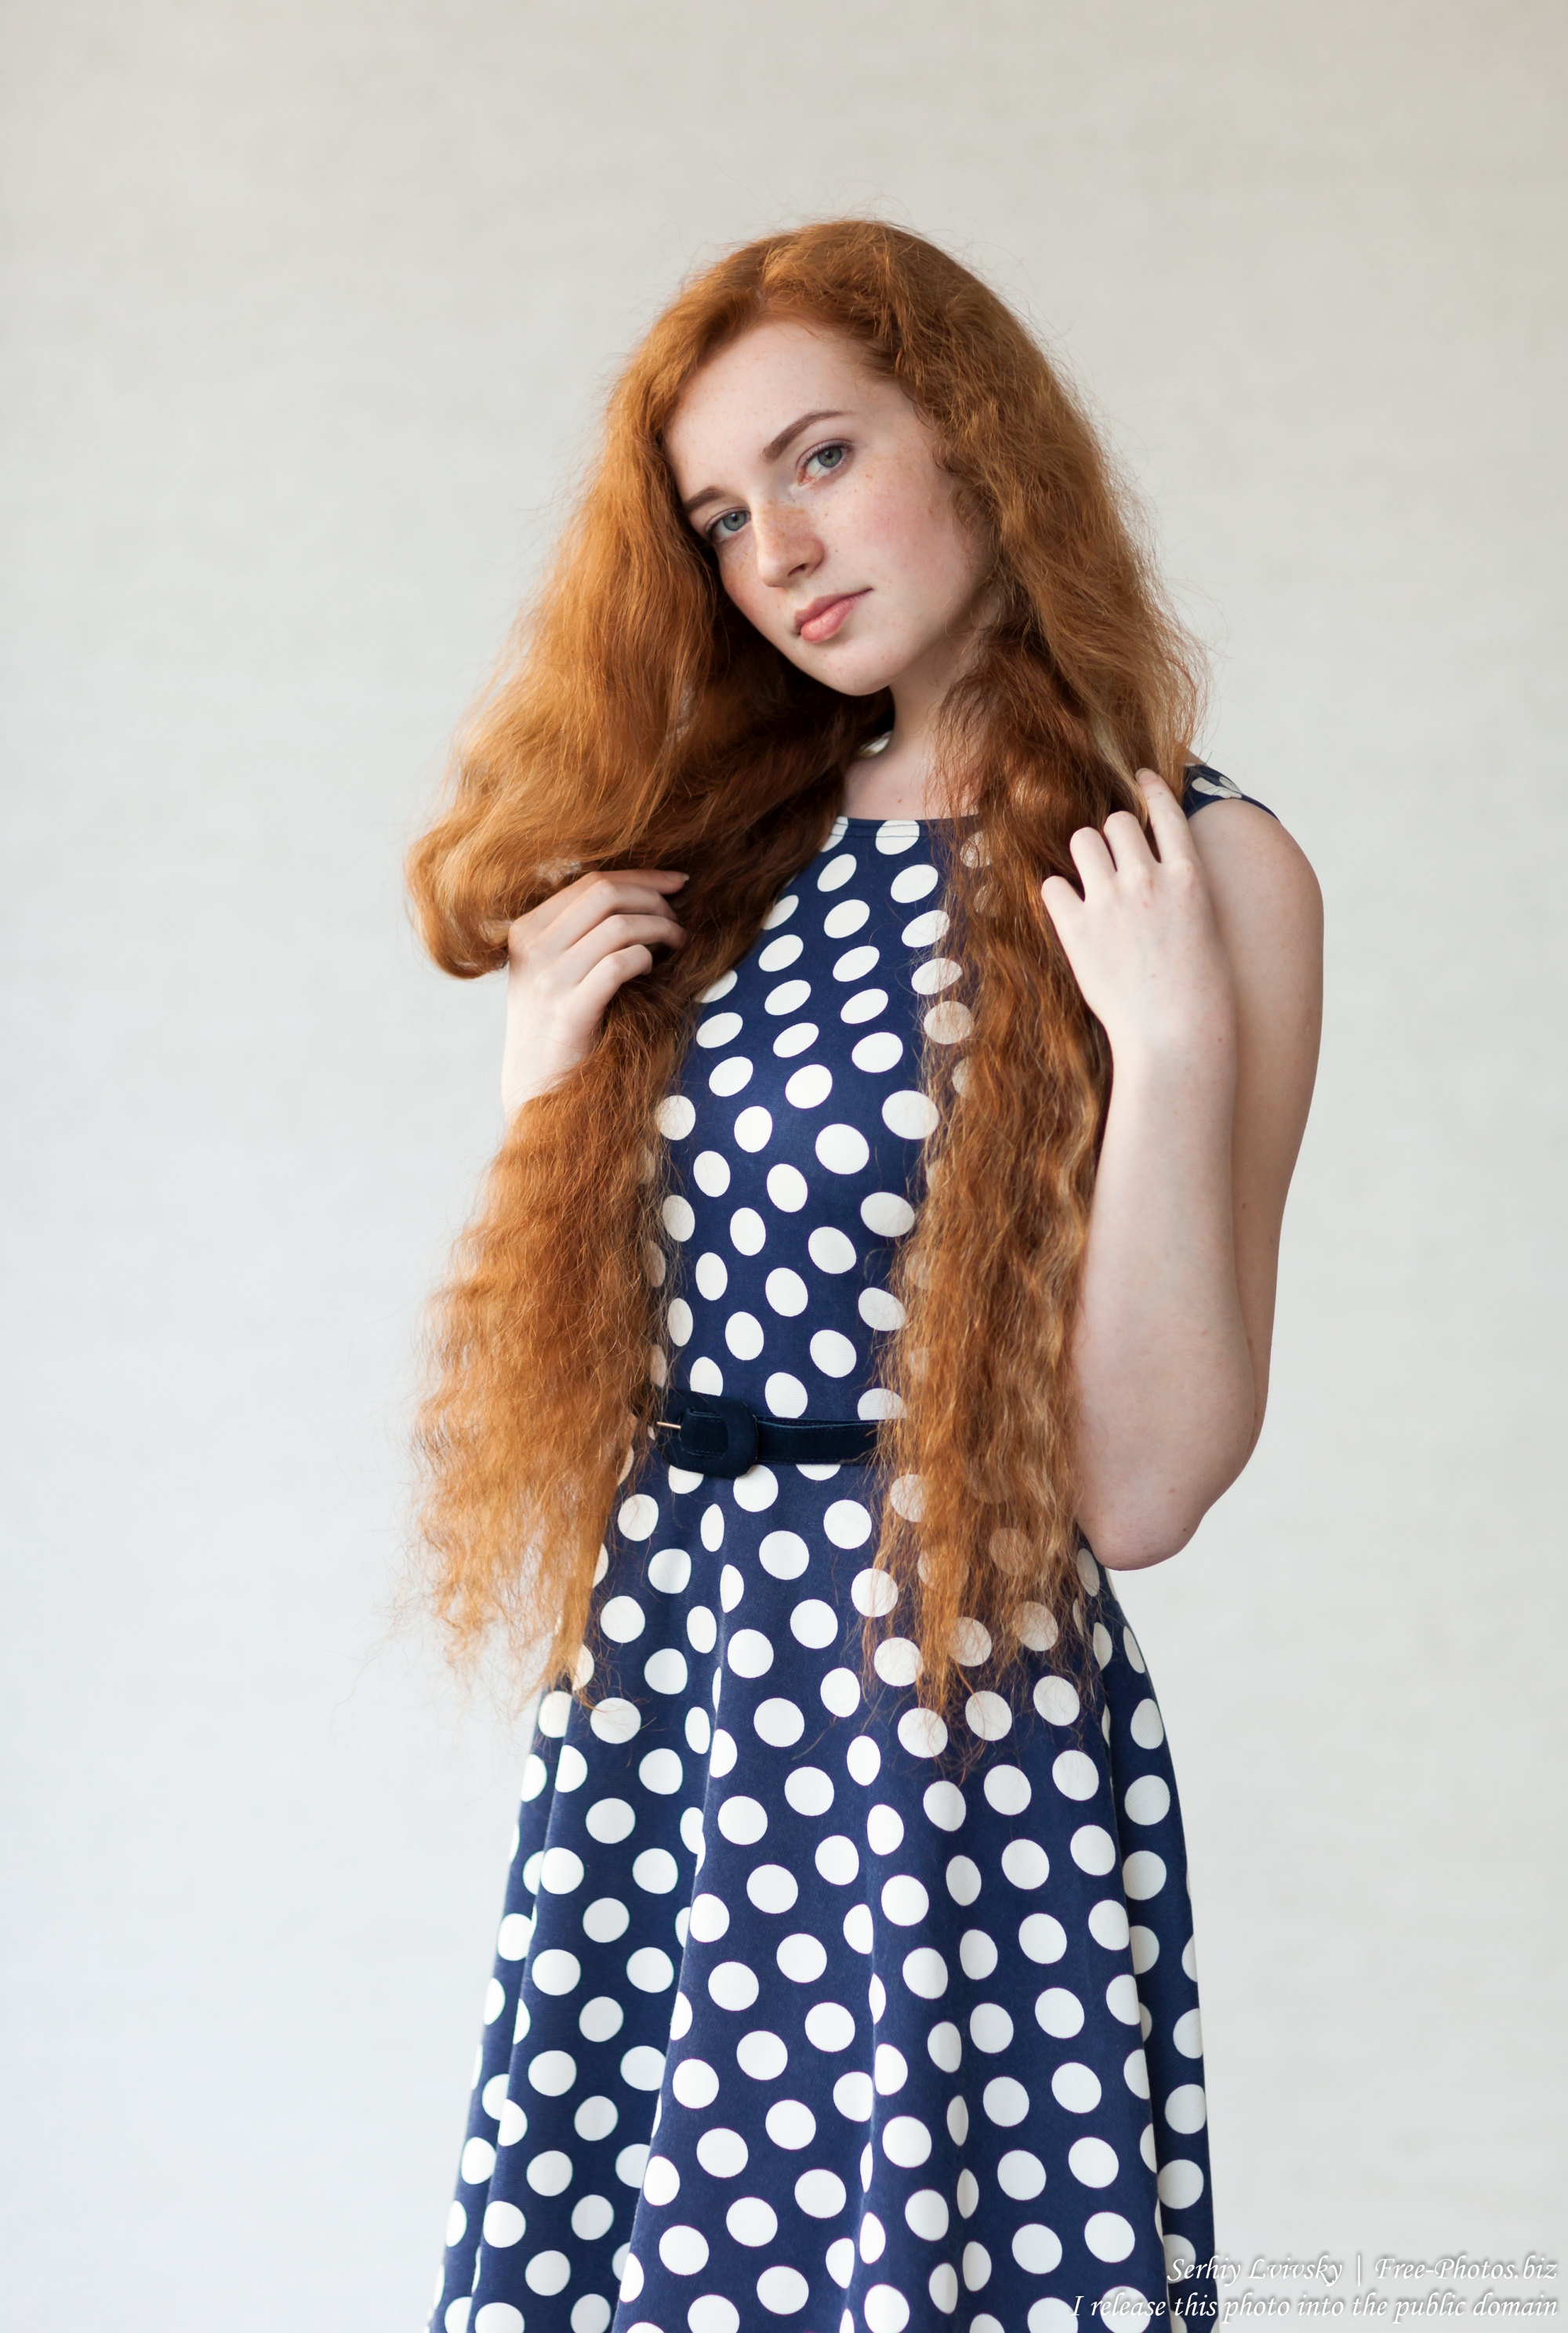 ania_a_19-year-old_natural_red-haired_girl_photographed_in_june_2017_by_serhiy_lvivsky_11